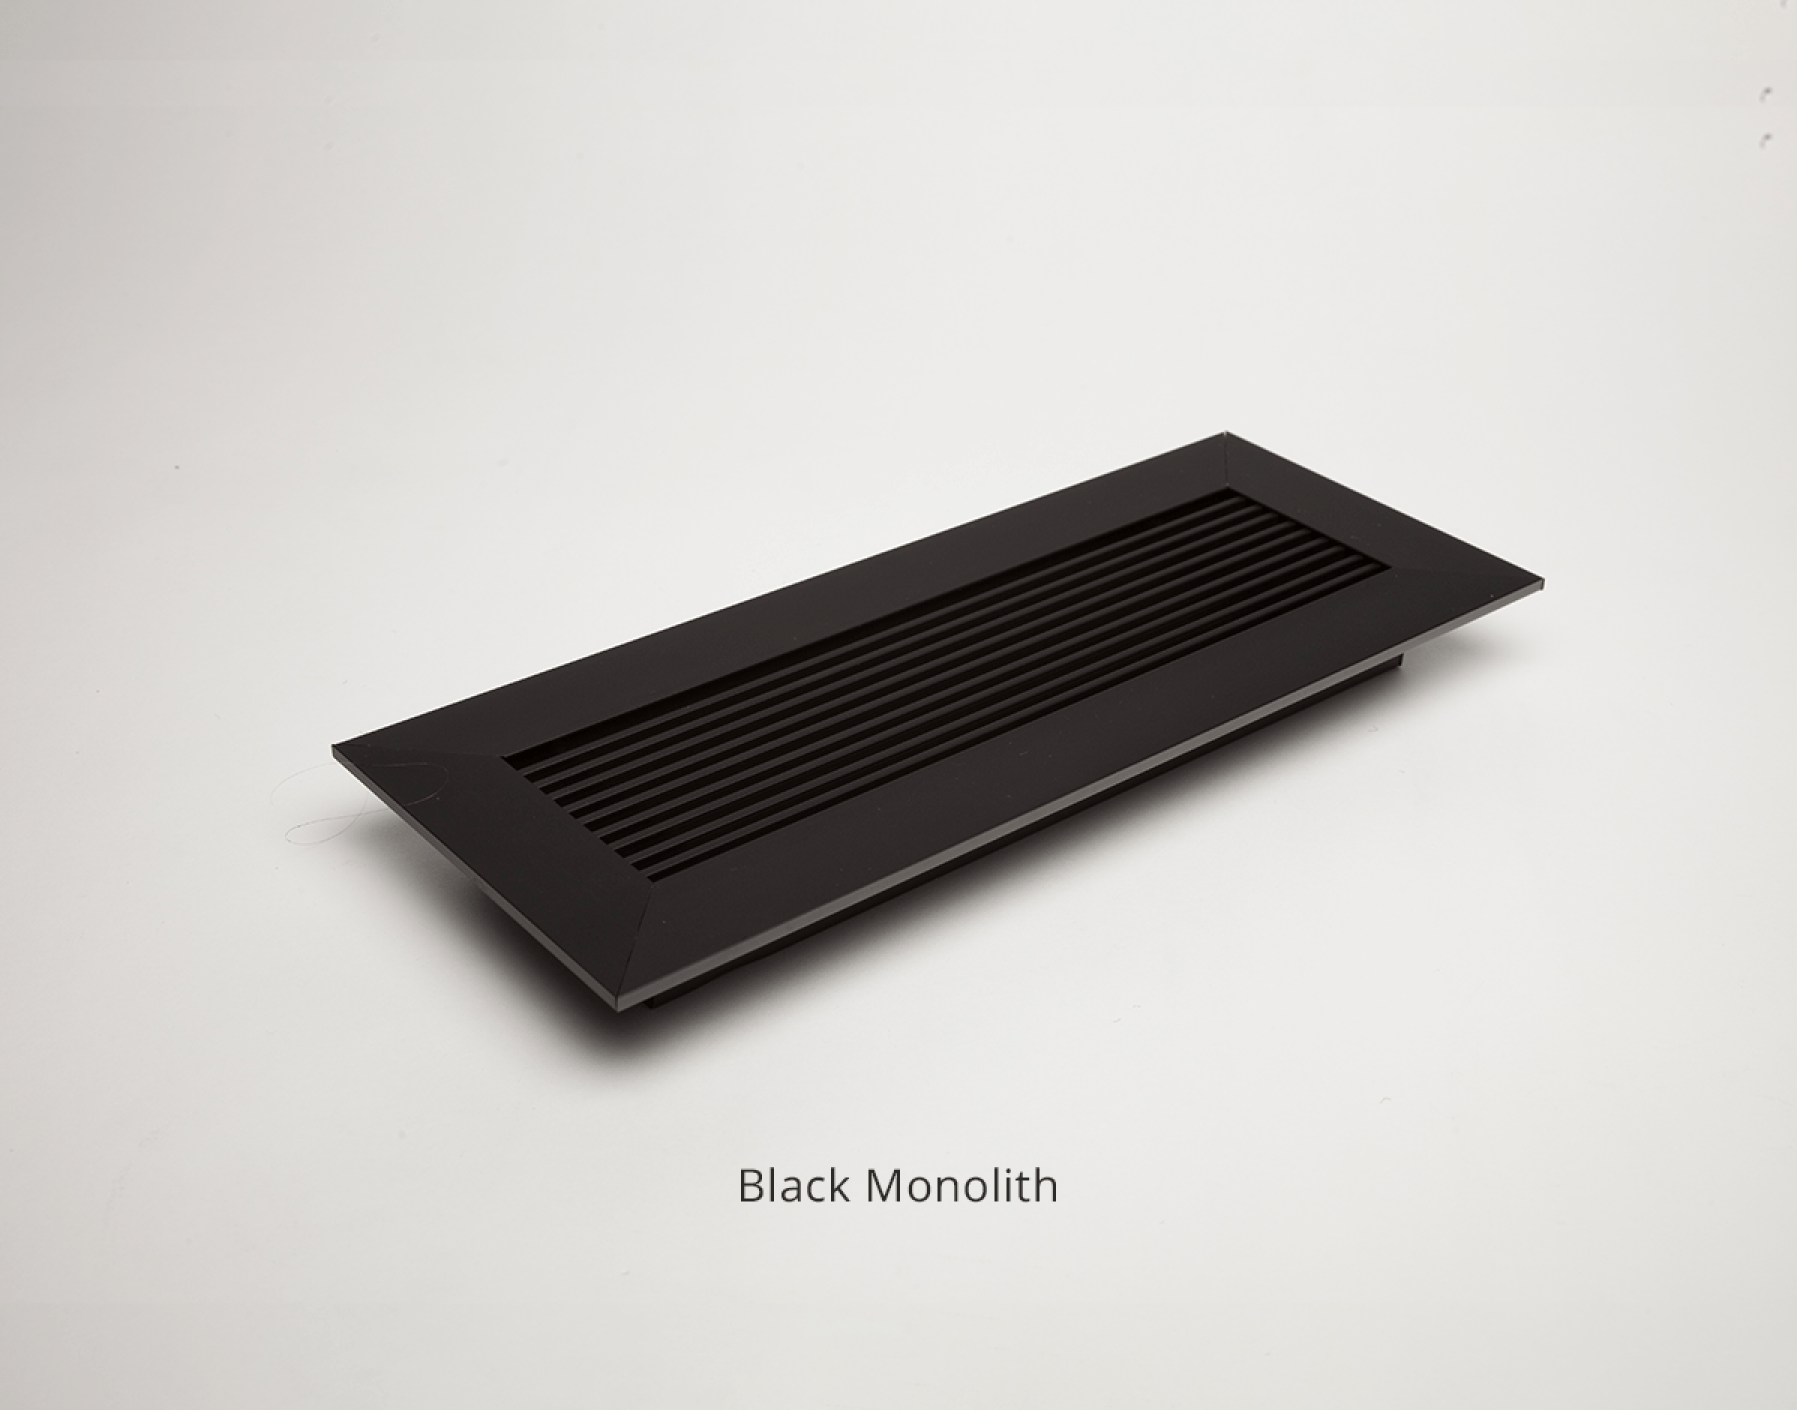 Black Monolith vent cover from kul grilles